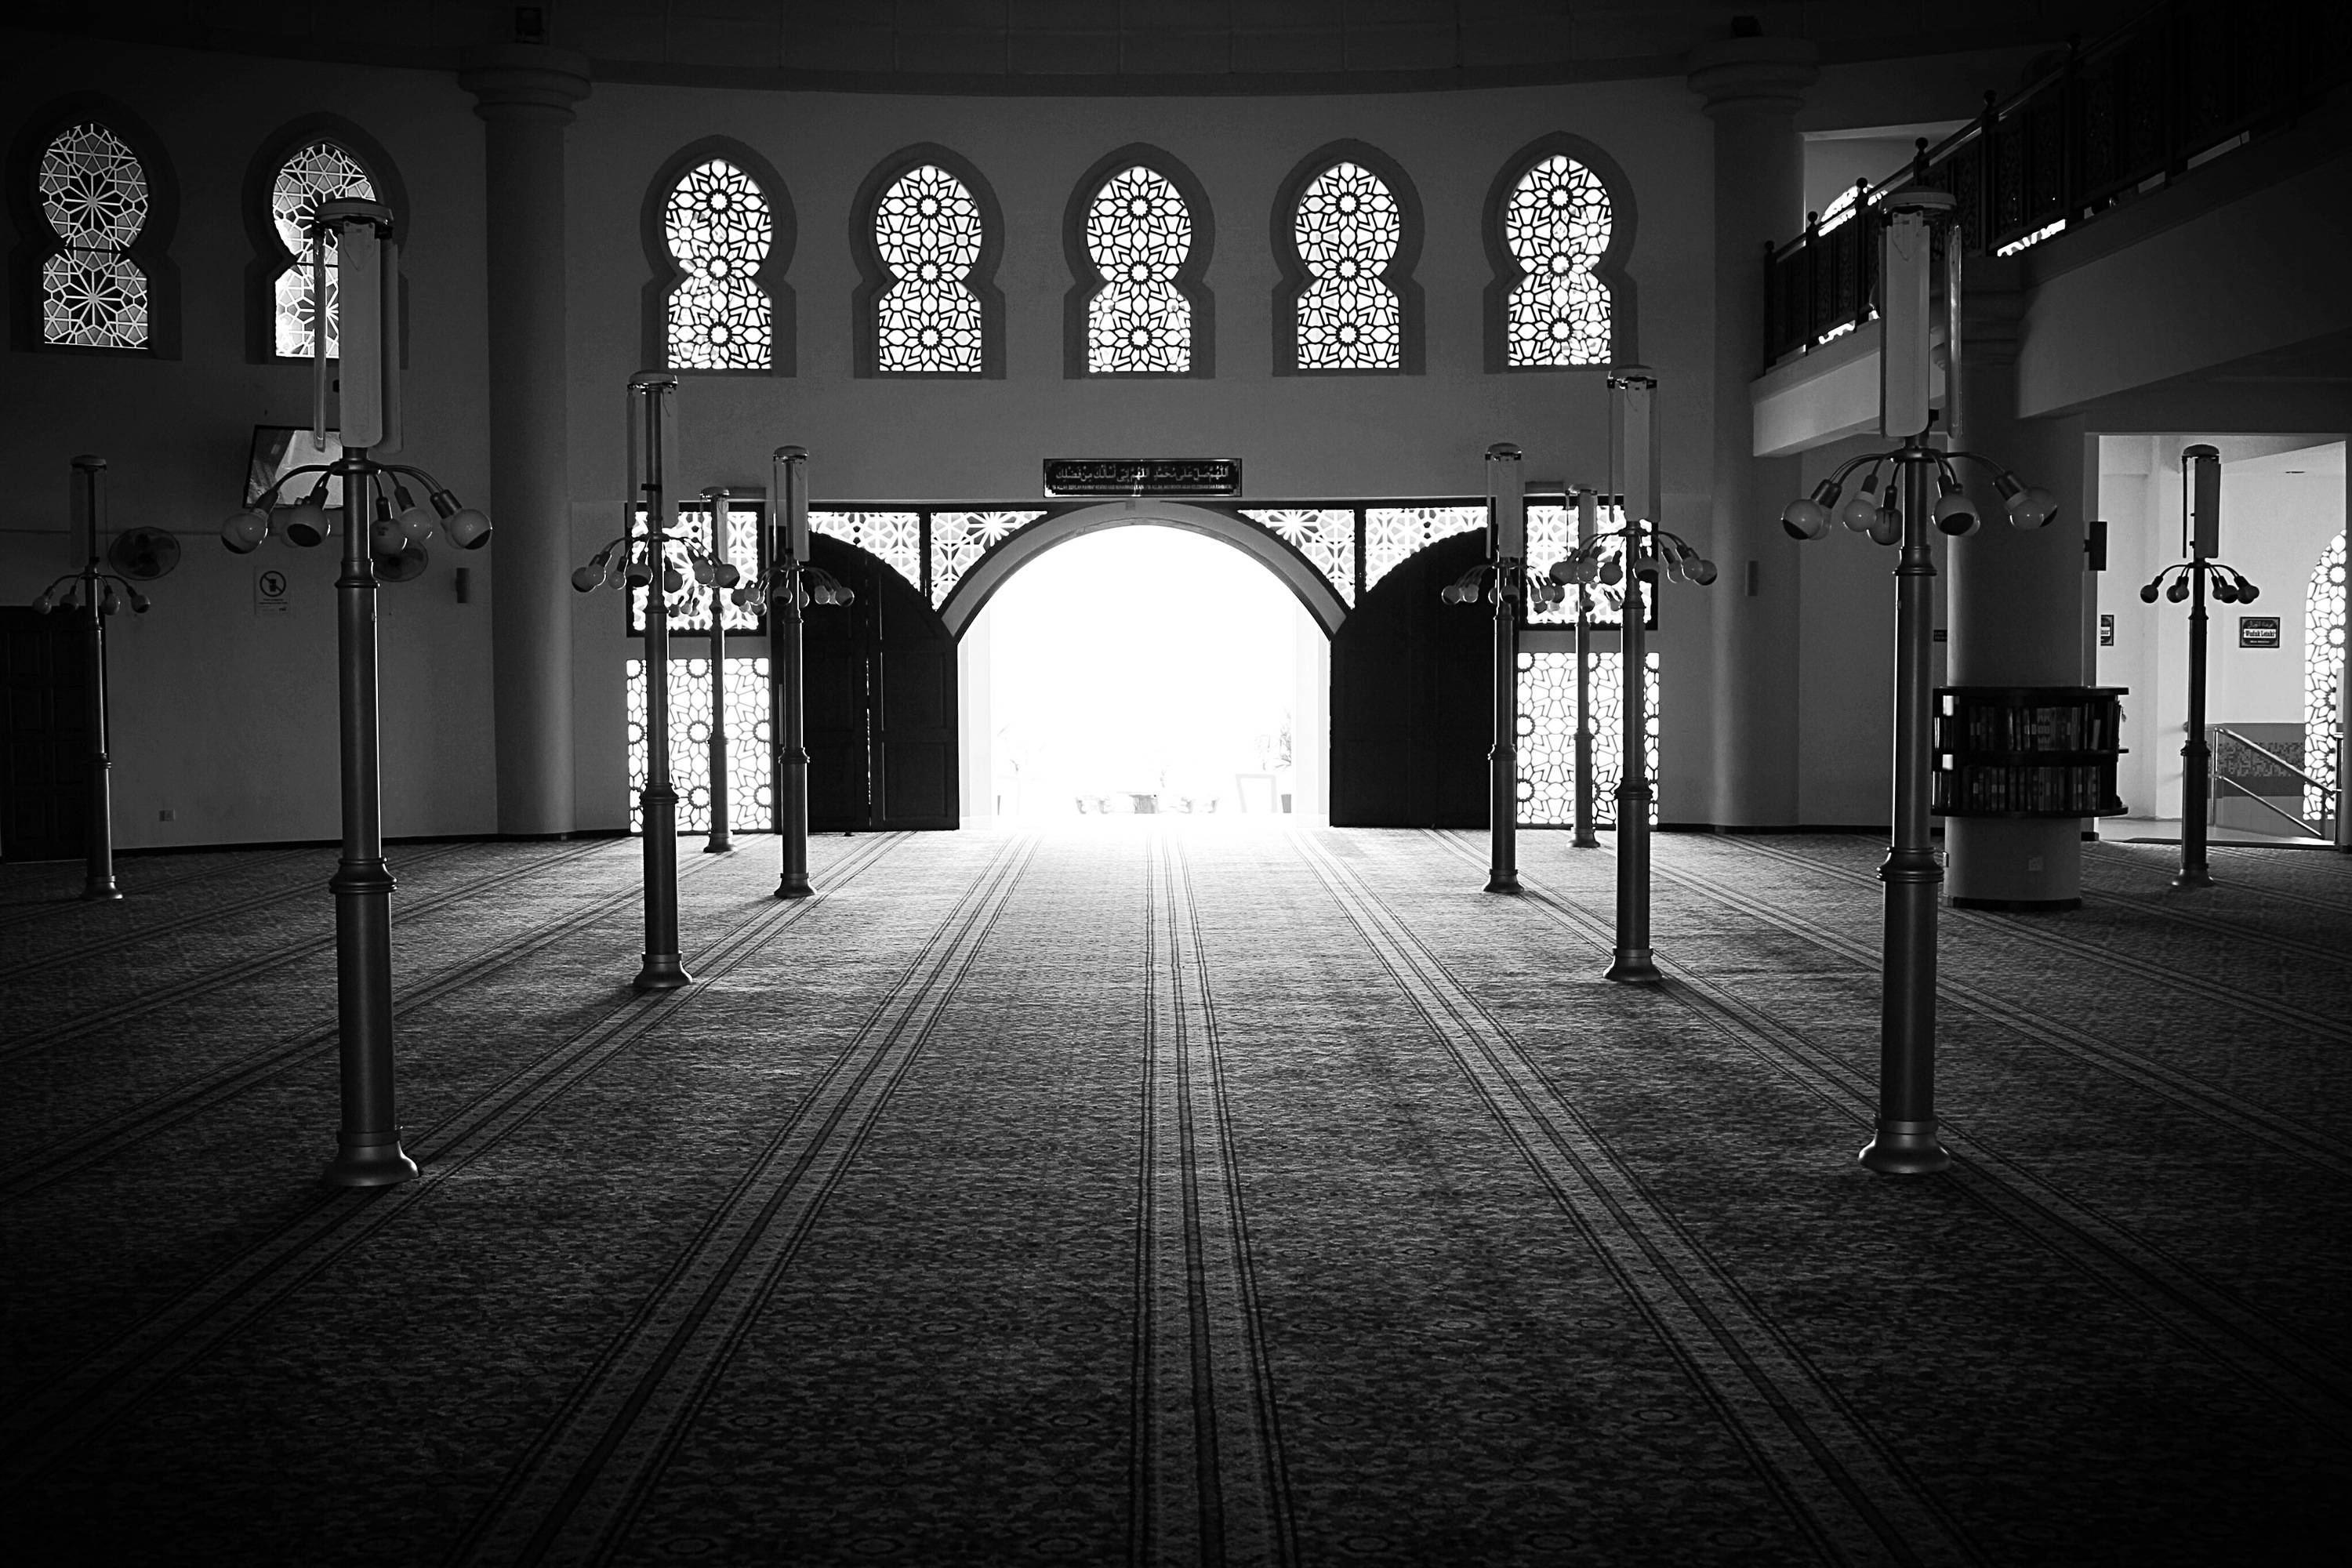 Isn’t it sad if someday, they have no interest to come to the mosque anymore, despite the wide-opened door?